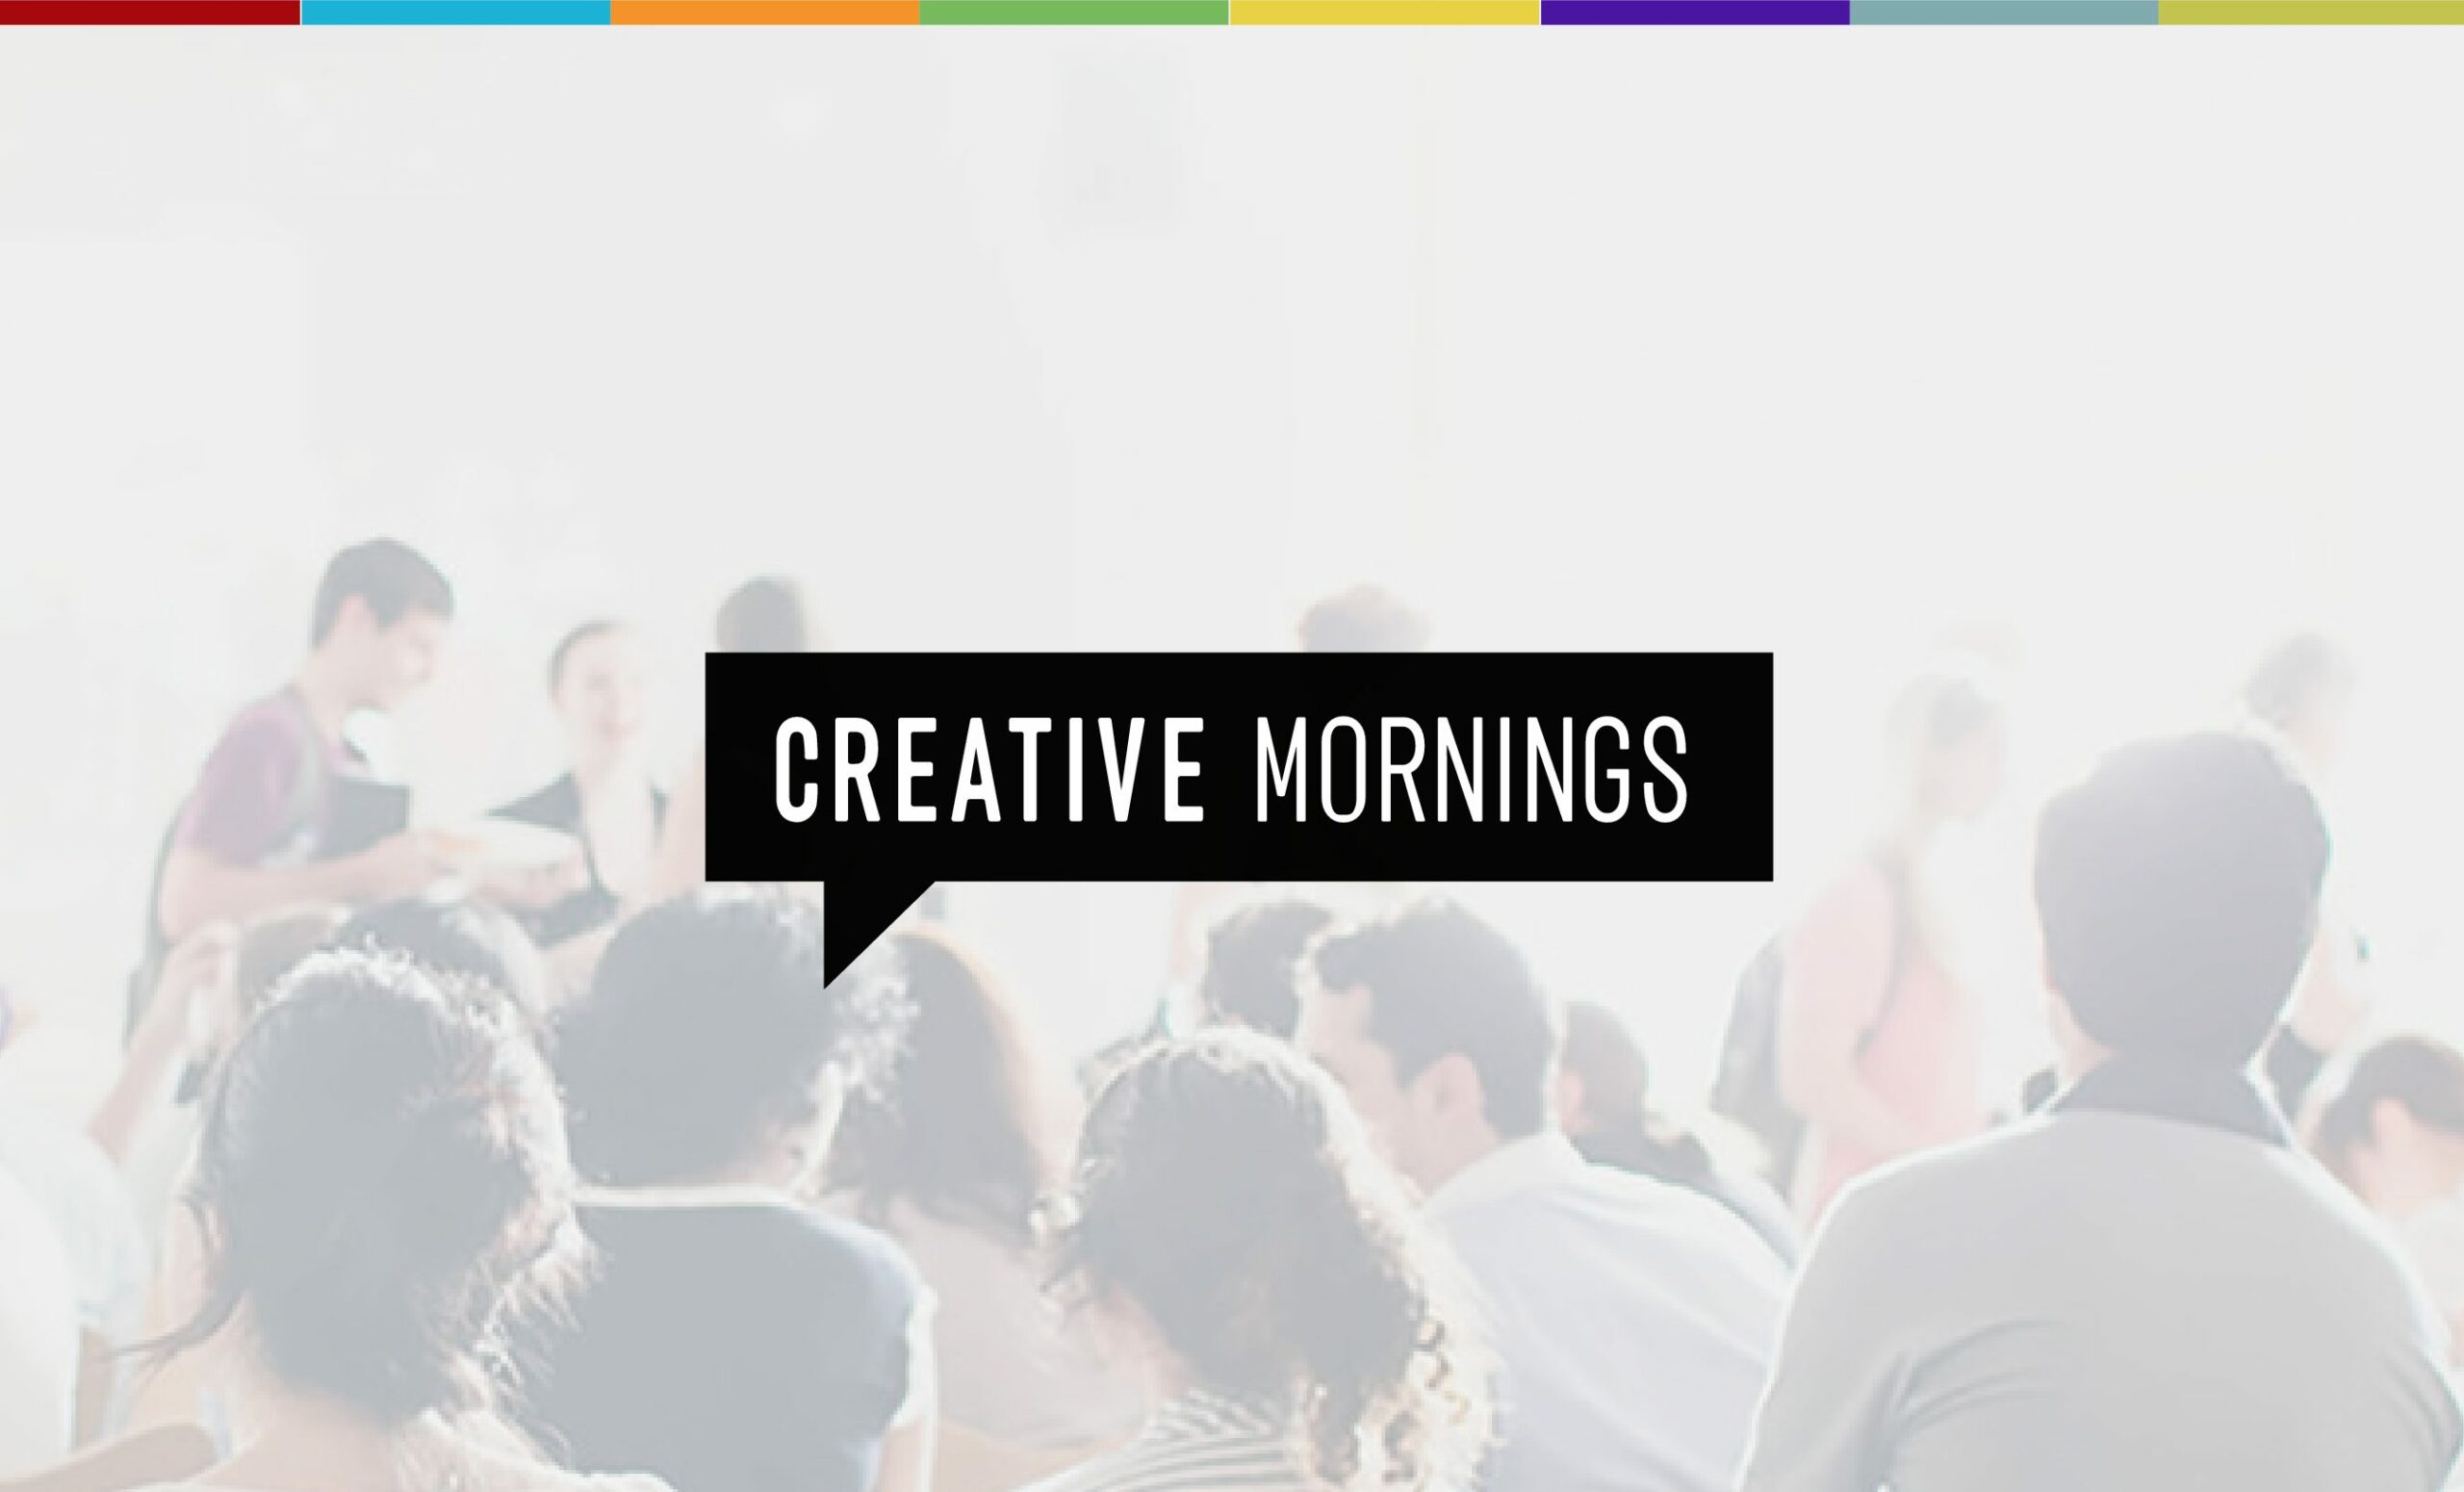 What’s So Creative About Mornings?